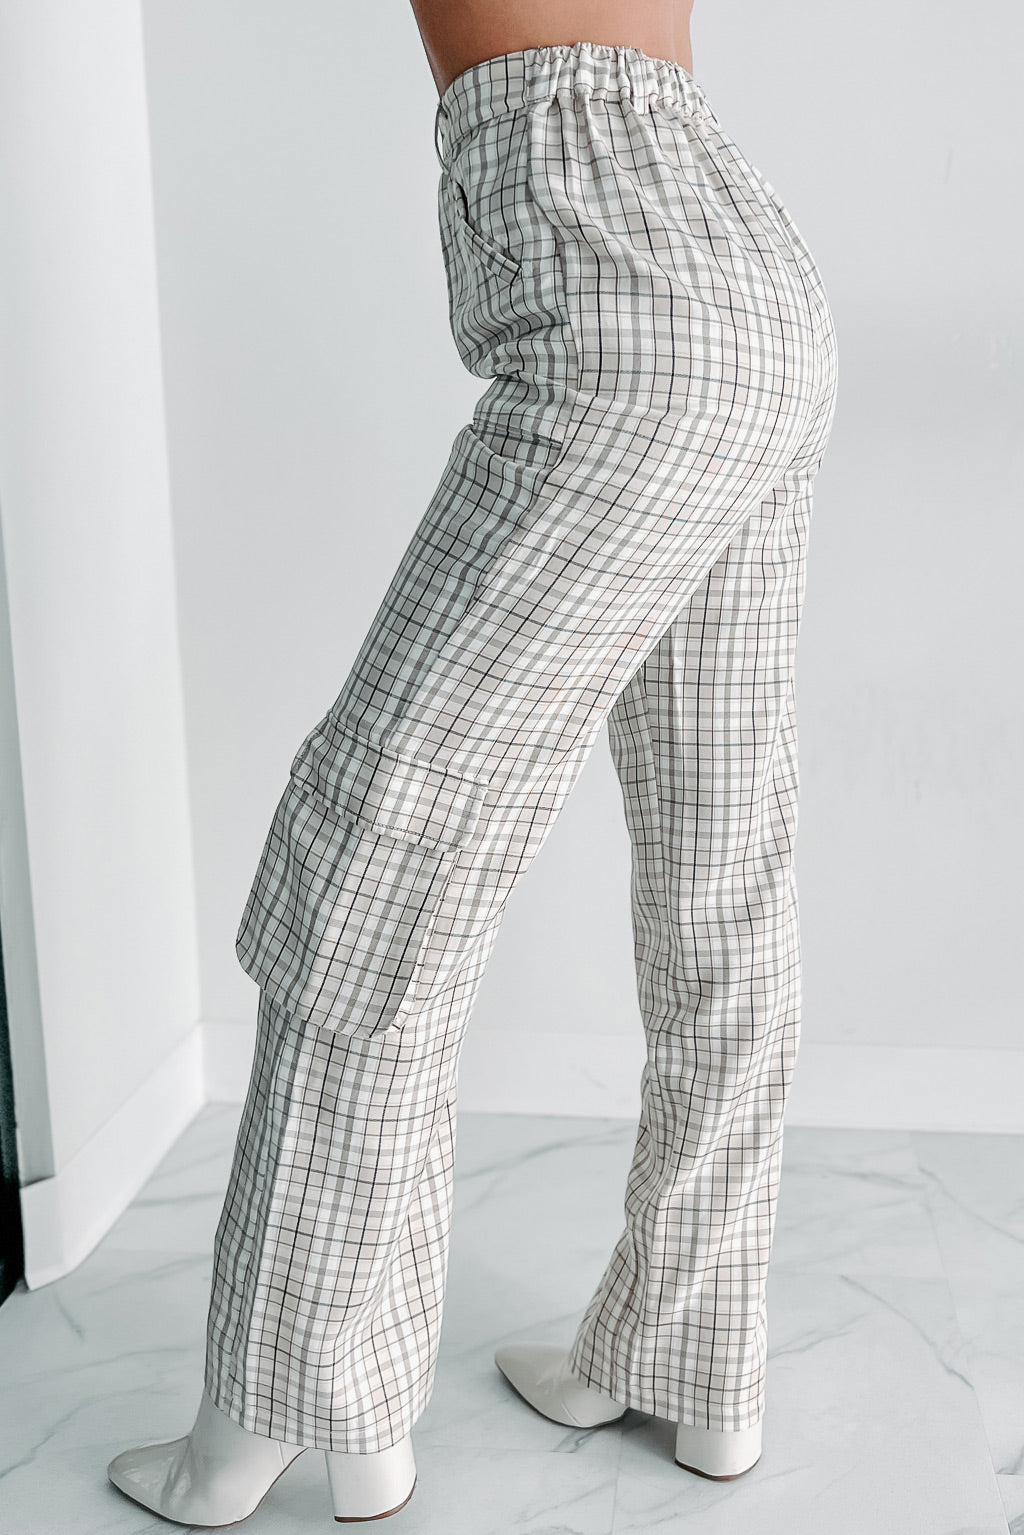 Blast From the Past Plaid Cargo Pants (Taupe) - NanaMacs